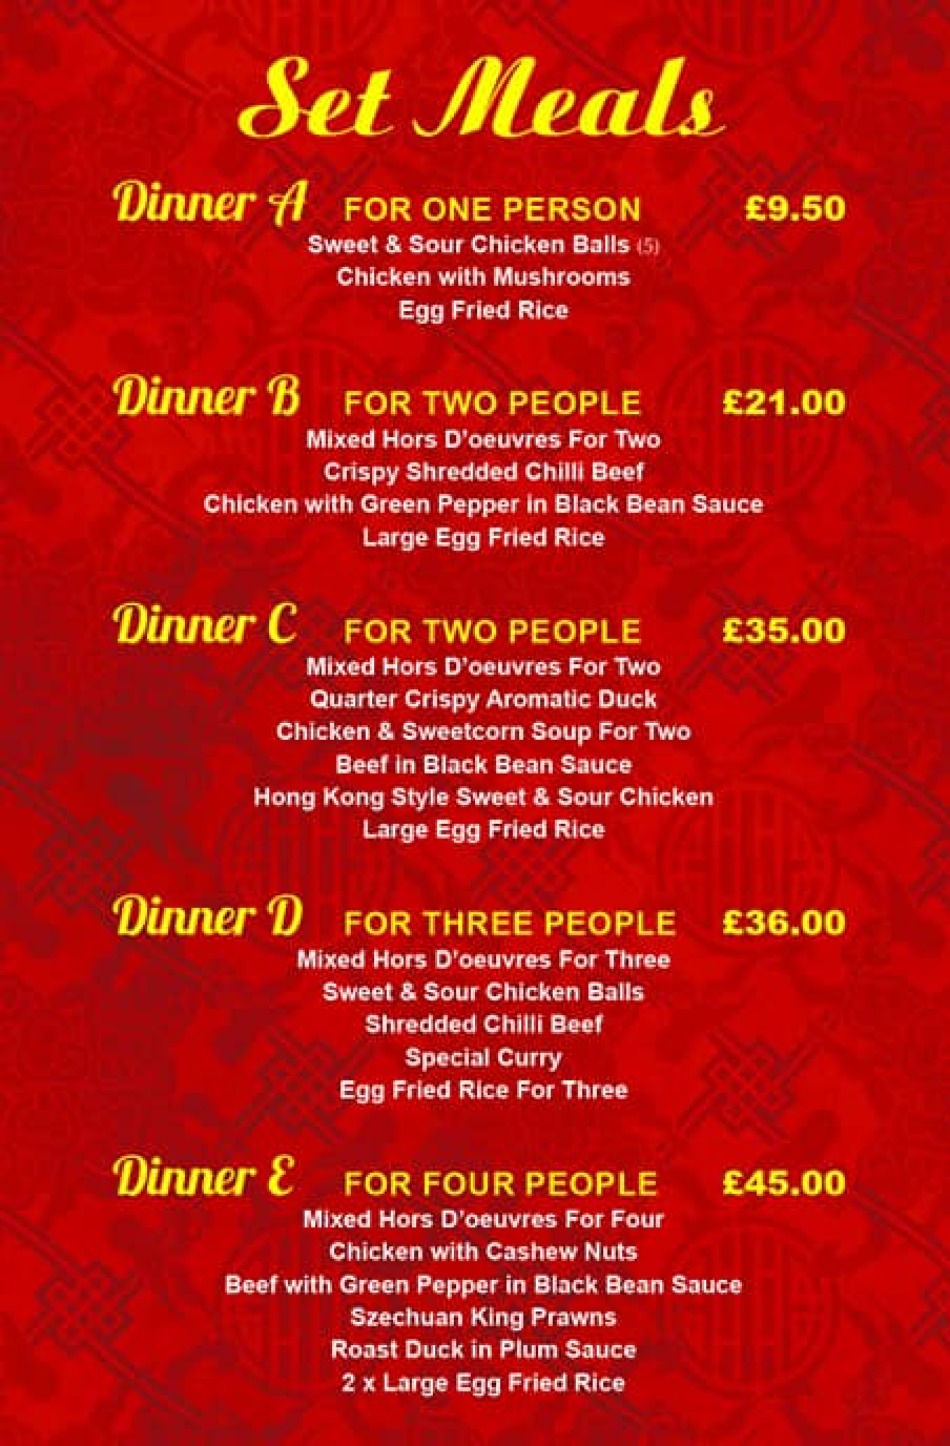 Takeaway Restaurant Menu Page - Food Palace Chinese Restaurant - Blackpool